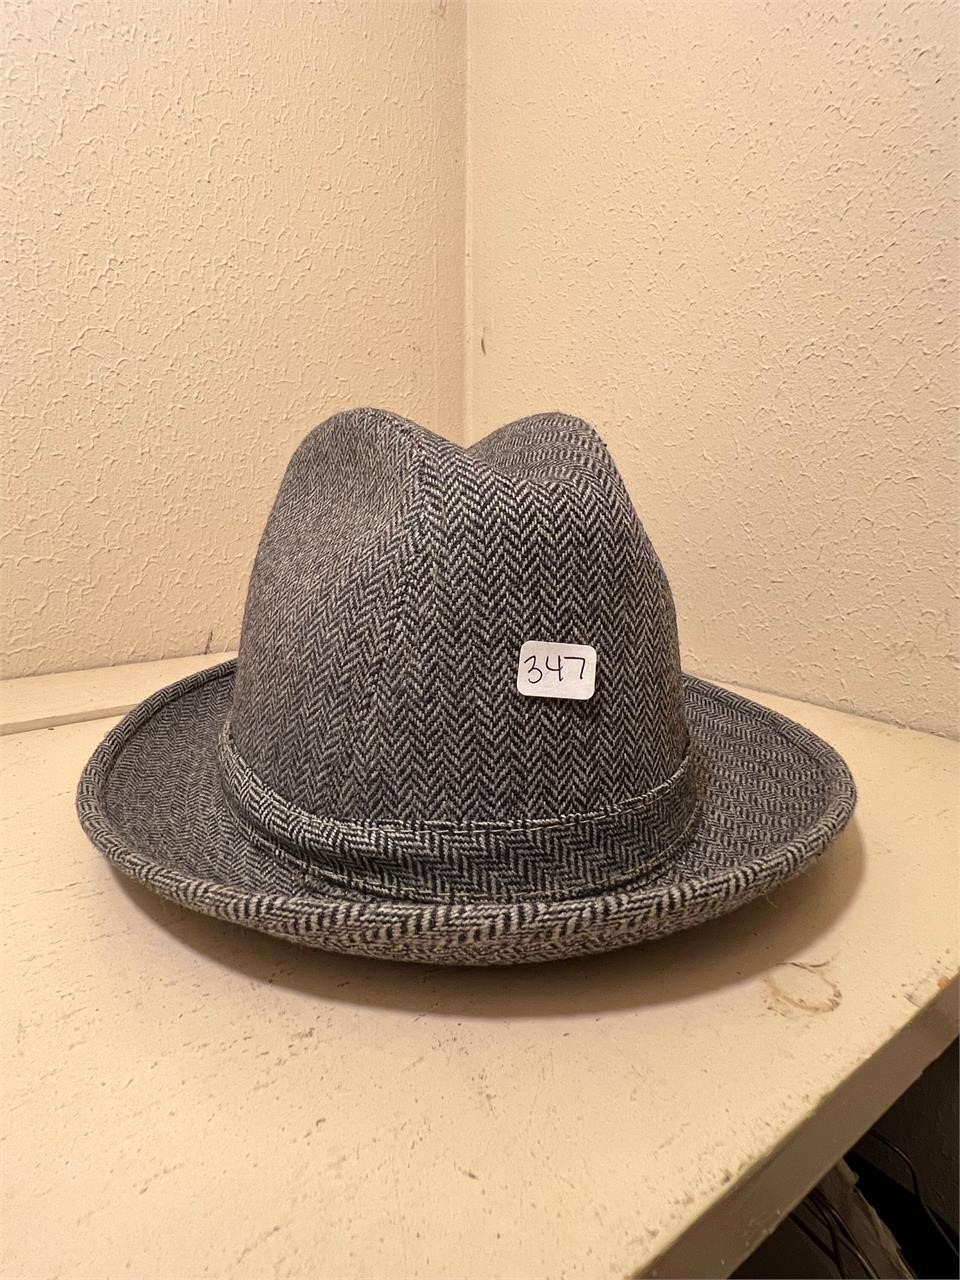 MADE IN USA BOWLER HAT ARTEL